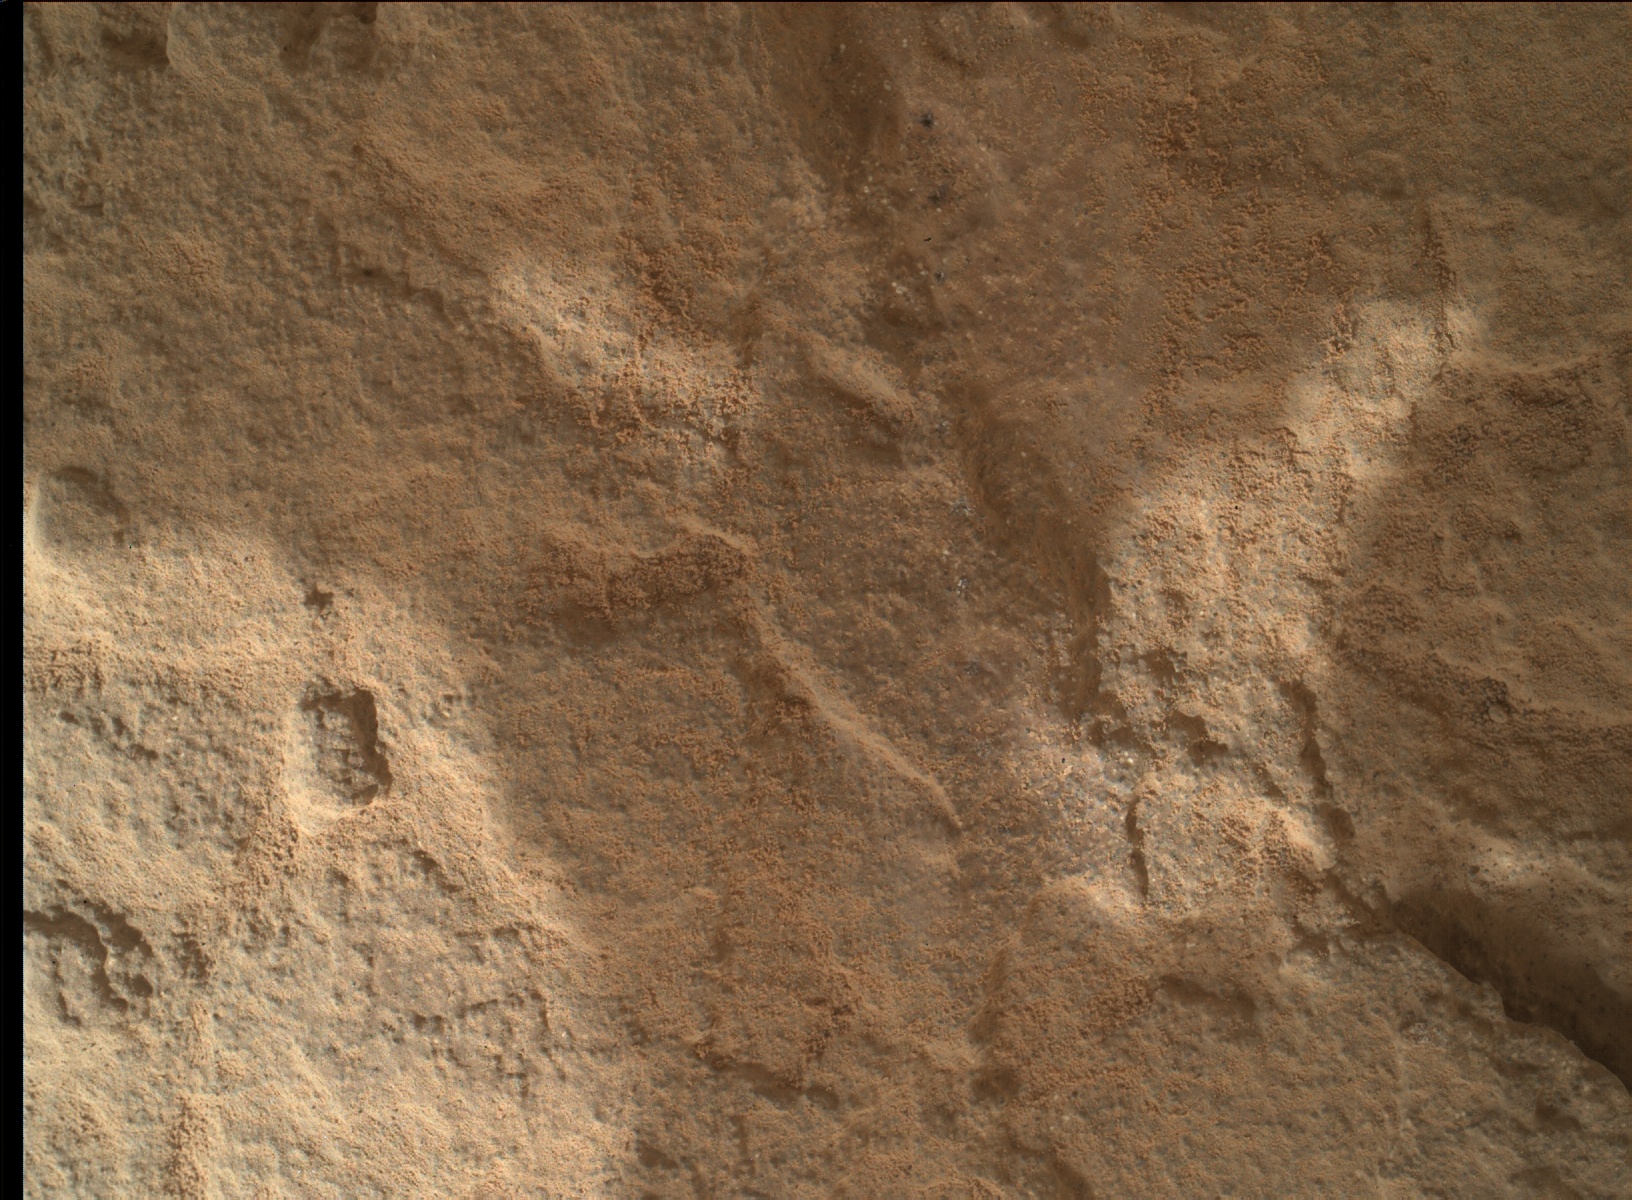 Nasa's Mars rover Curiosity acquired this image using its Mars Hand Lens Imager (MAHLI) on Sol 1710